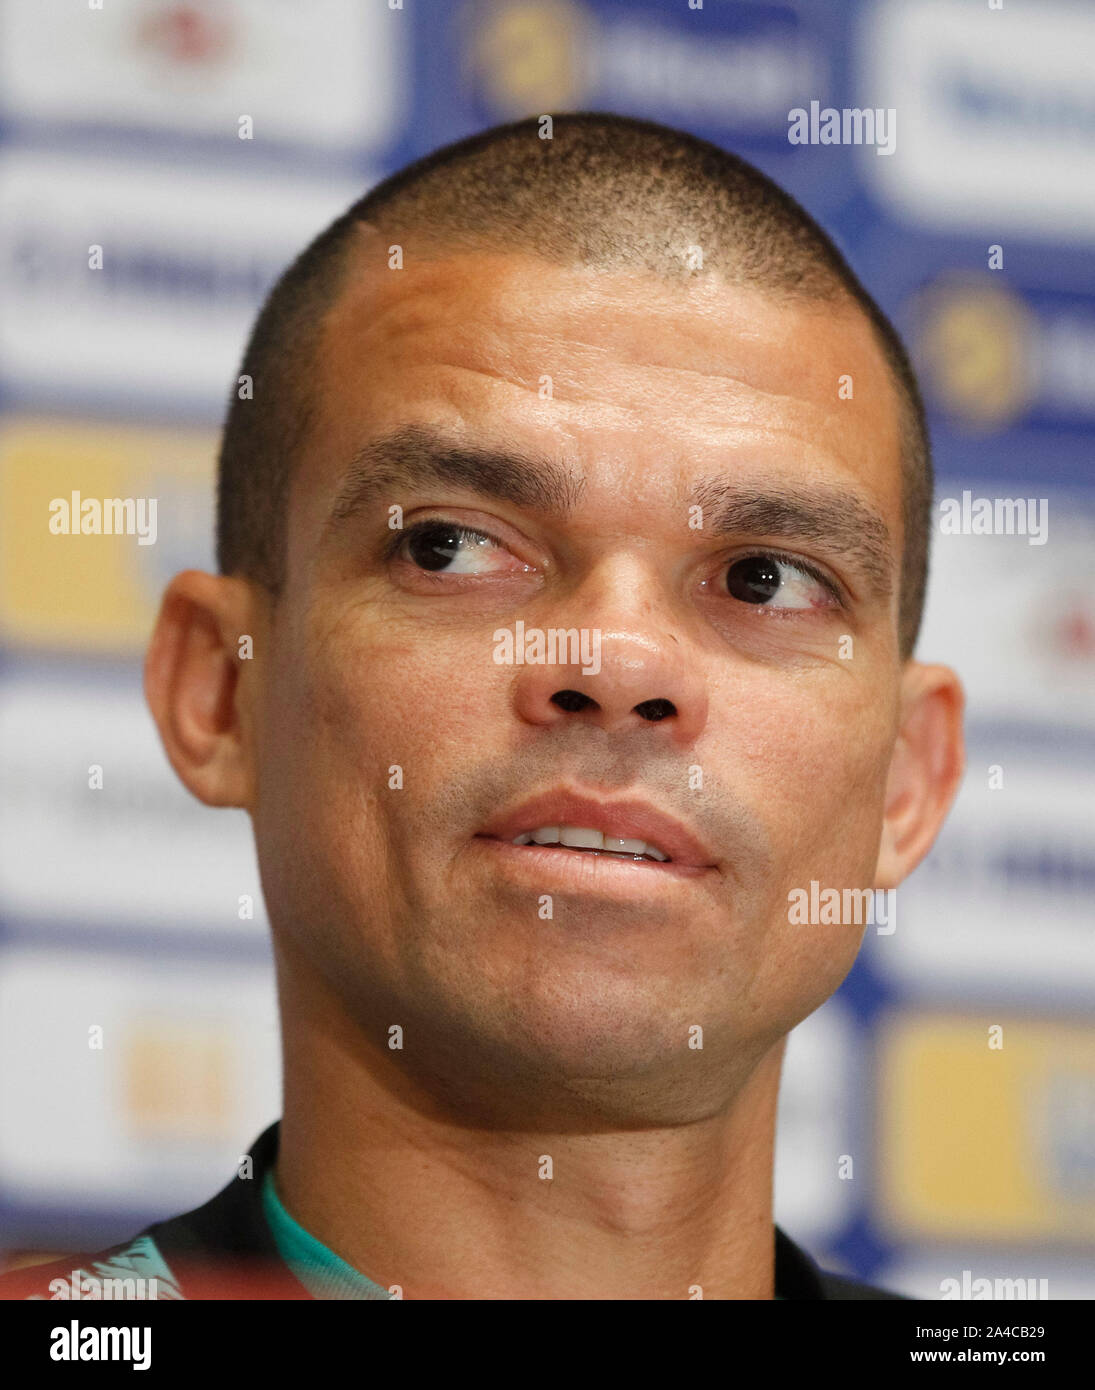 Kiev, Ukraine. 13th Oct, 2019. Portugal player Pepe speaks during a press conference at the NSC Olimpiyskiy stadium in Kiev.Portugal and Ukrainian national teams face in the UEFA Euro 2020 qualifier football match on 14 October 2019. Credit: SOPA Images Limited/Alamy Live News Stock Photo